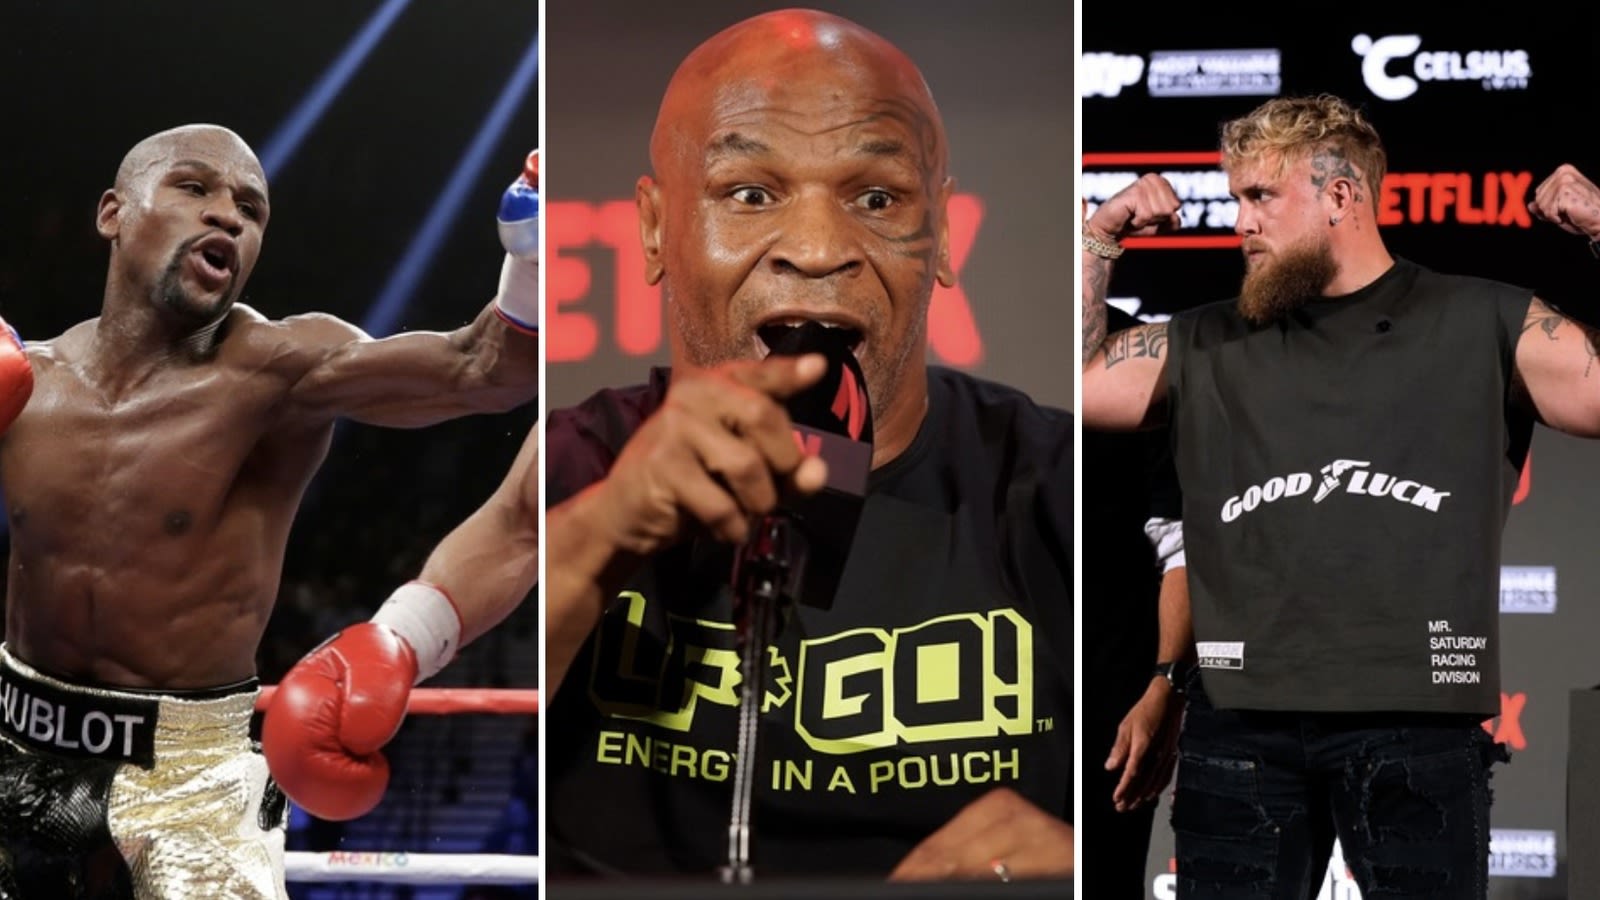 Floyd Mayweather Jr accuses Jake Paul of “stealing money” with Mike Tyson fight - Dexerto